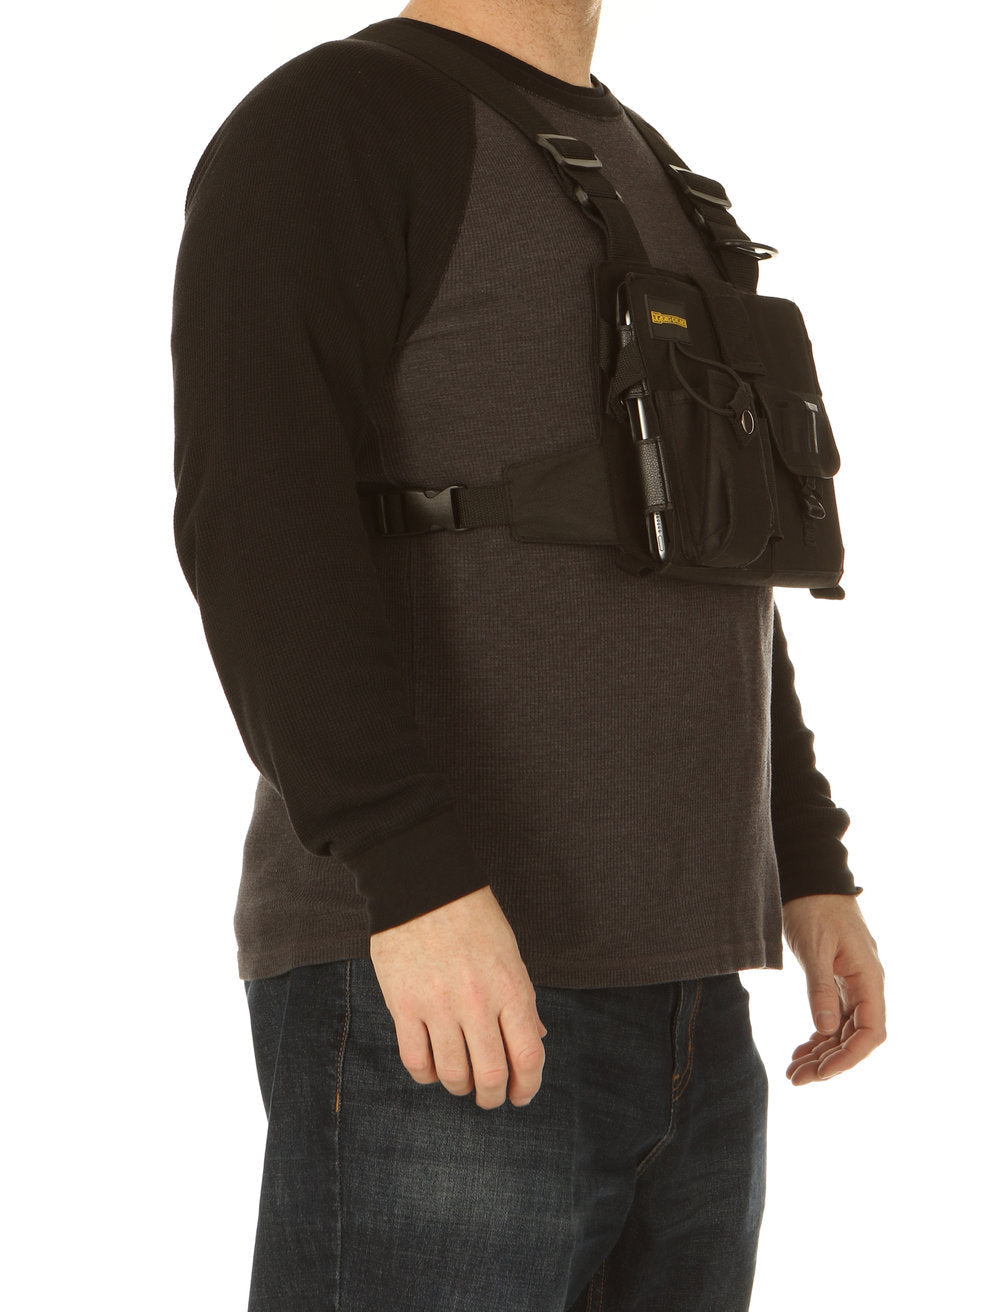 Wearable Luggage: The Best Chest Rigs And Holsters To Buy In 2023